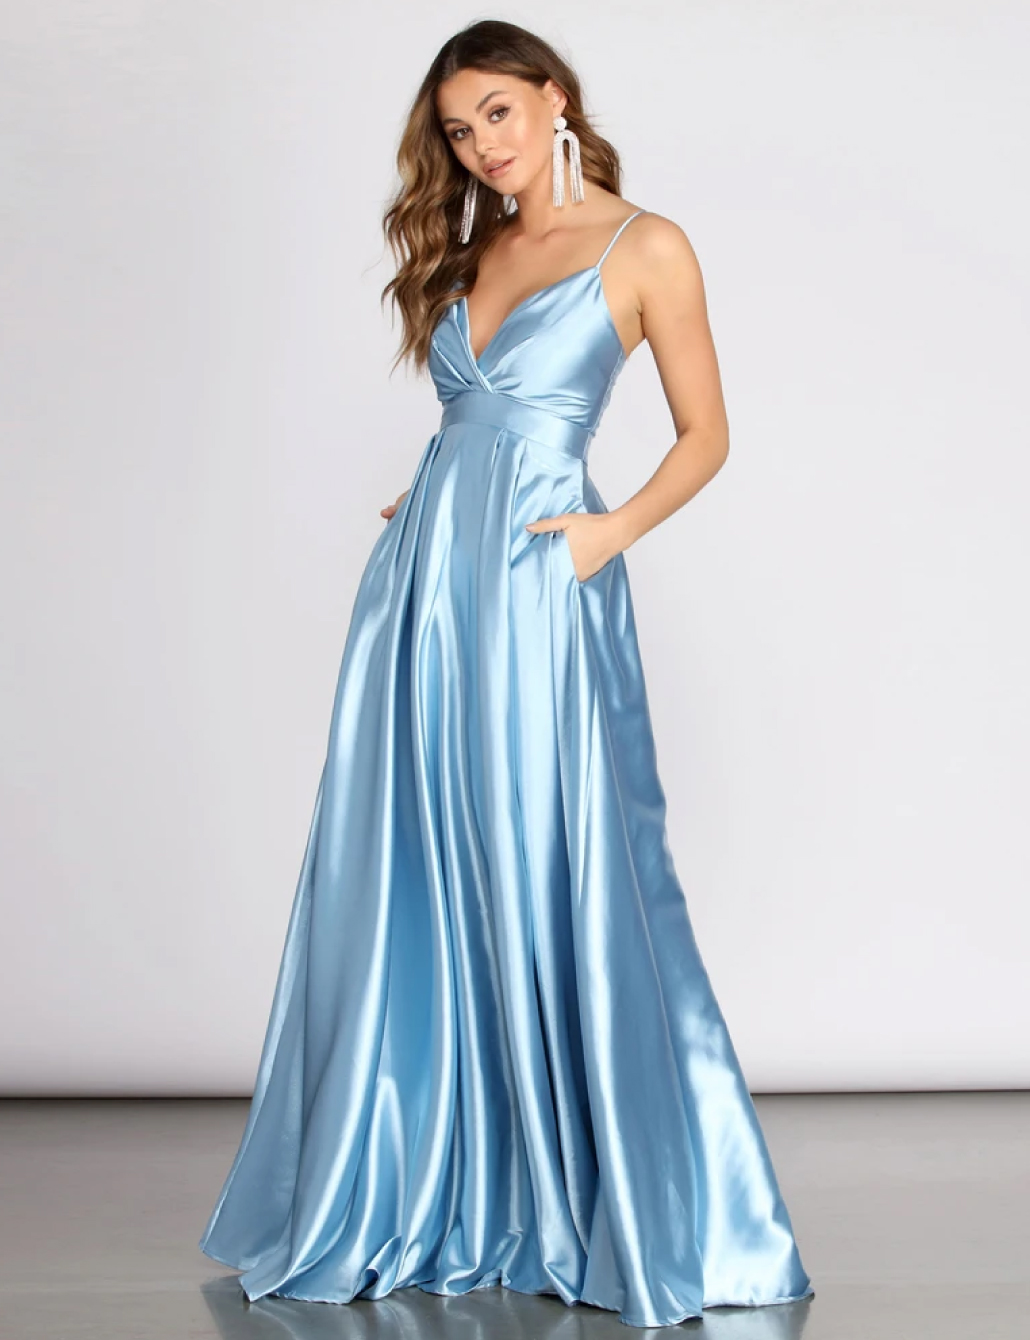 Stylish Winter Formal Dresses for High ...